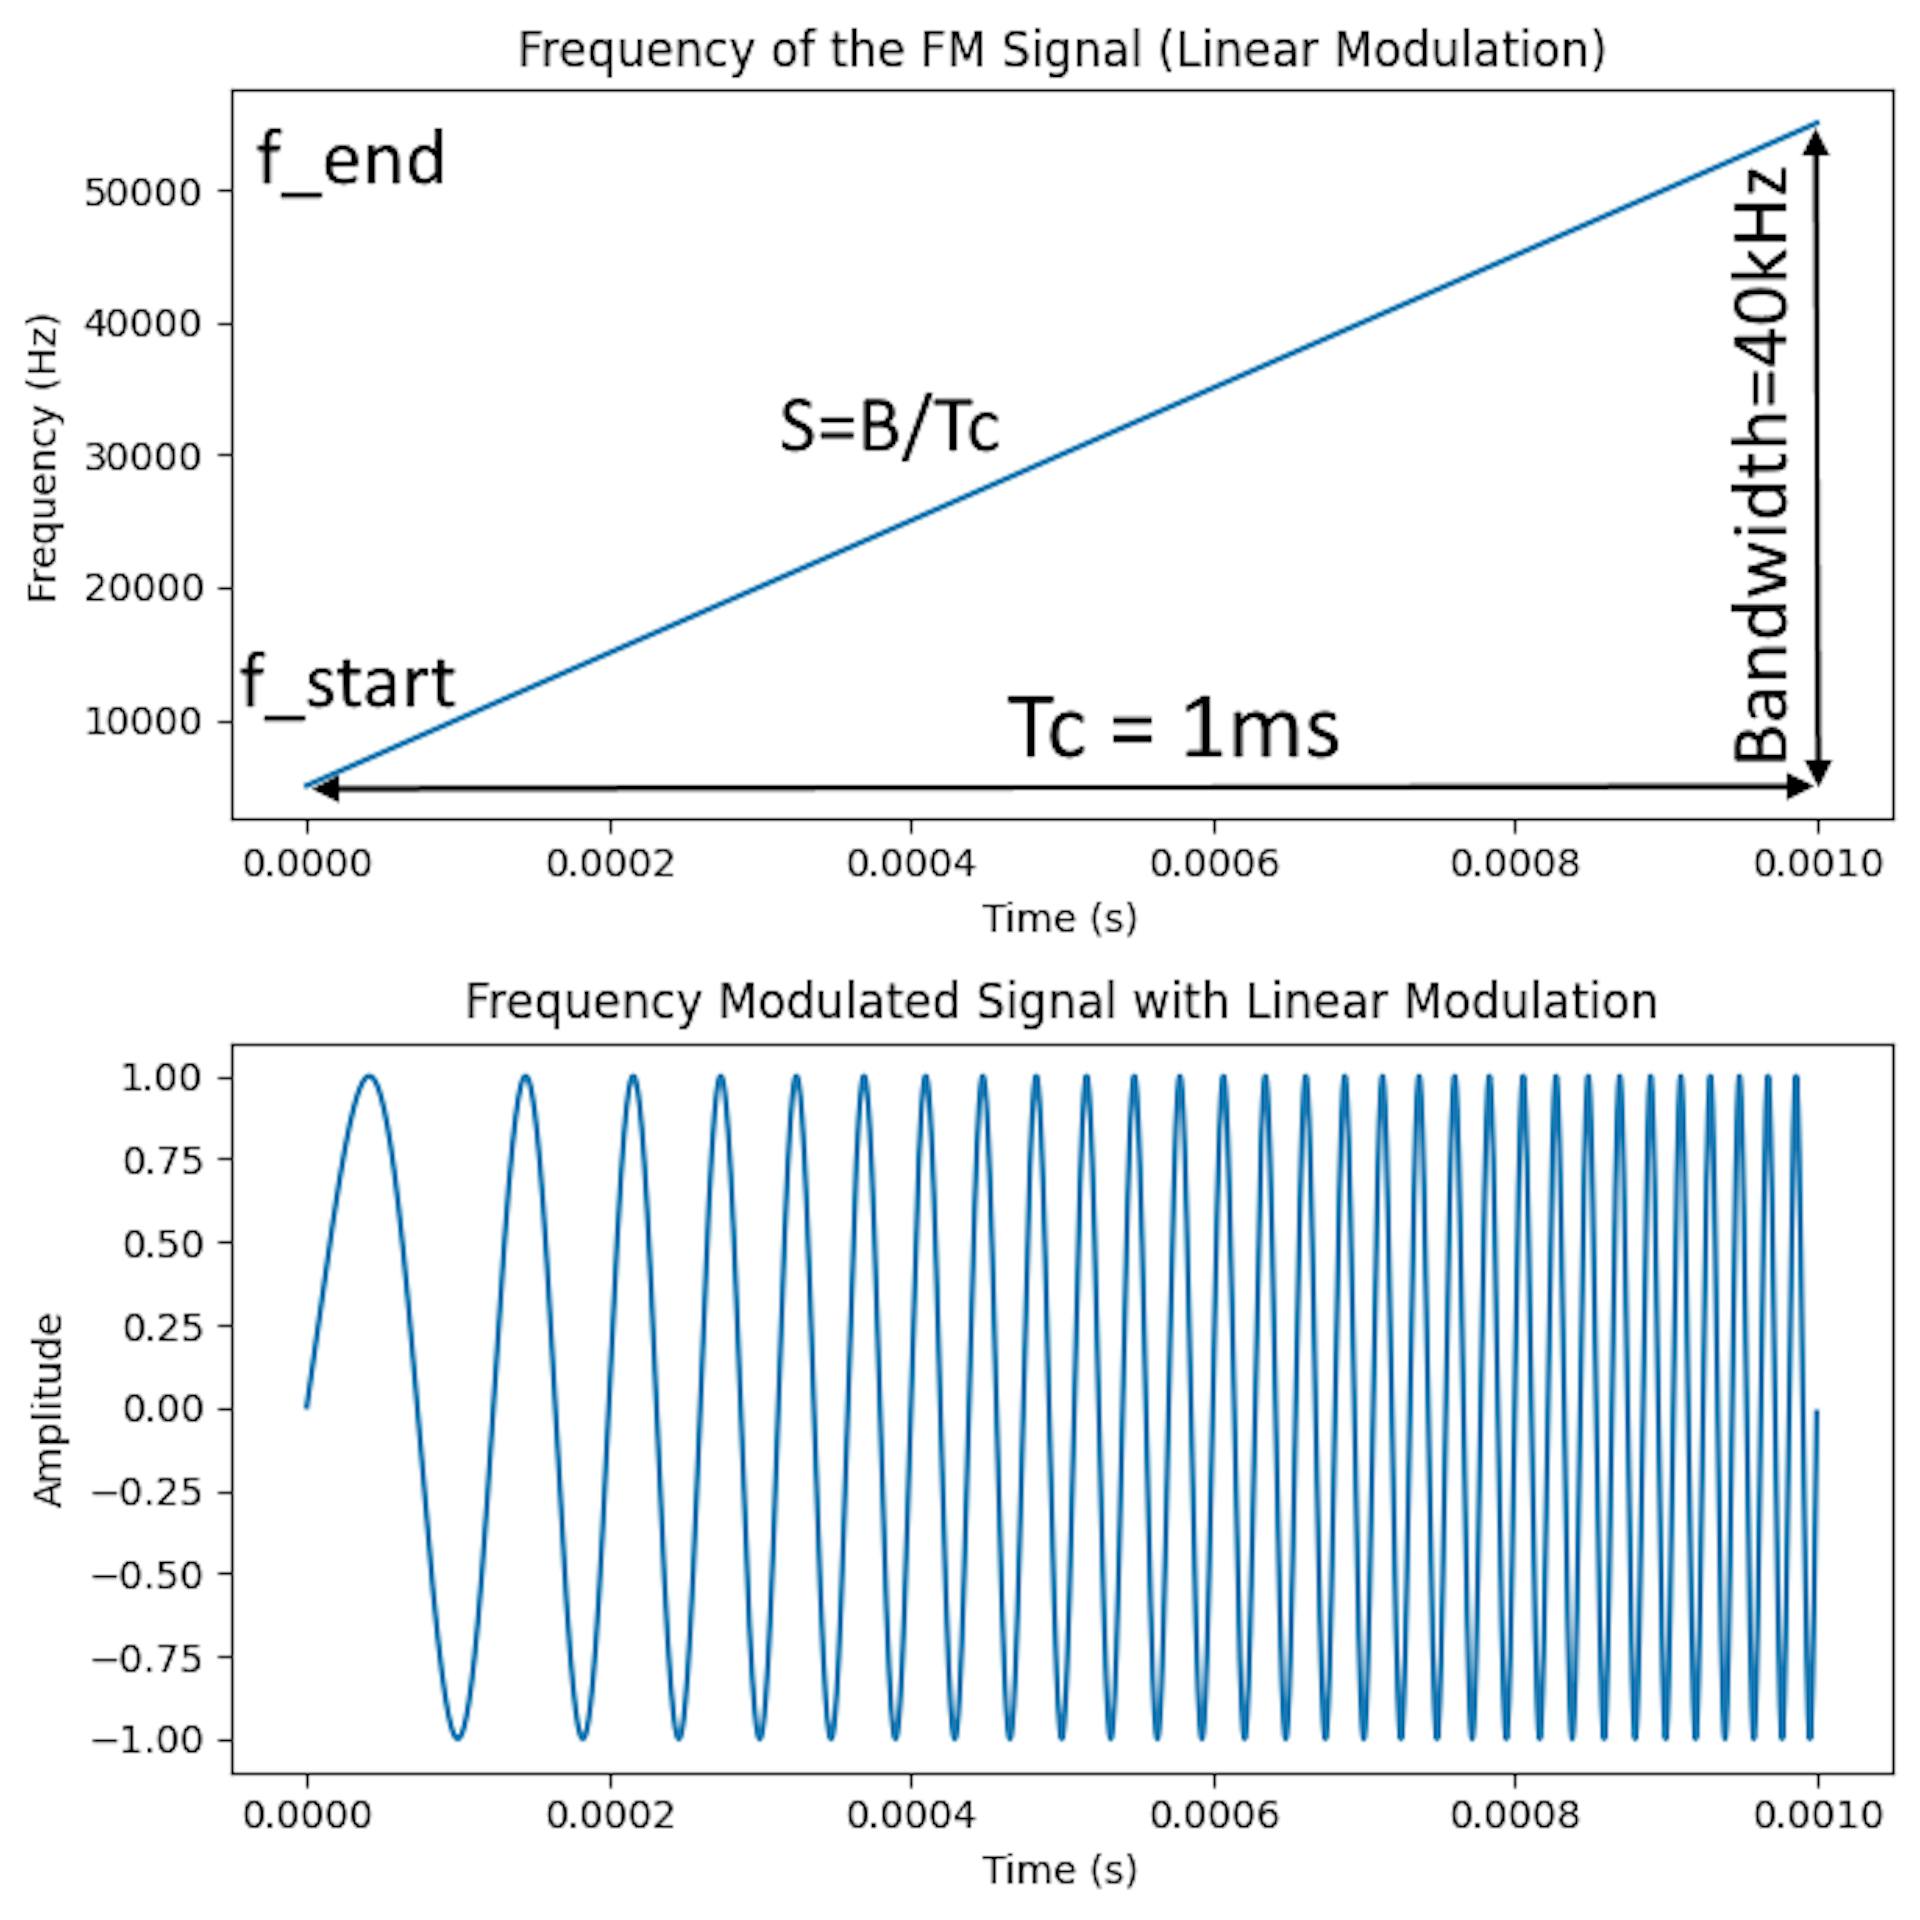 From the beginning to the end of the chirp, the radio wave frequency is modulated (changed) according to a predetermined linear law, as in the first figure. The second figure shows an example of a 1ms-long chirp.